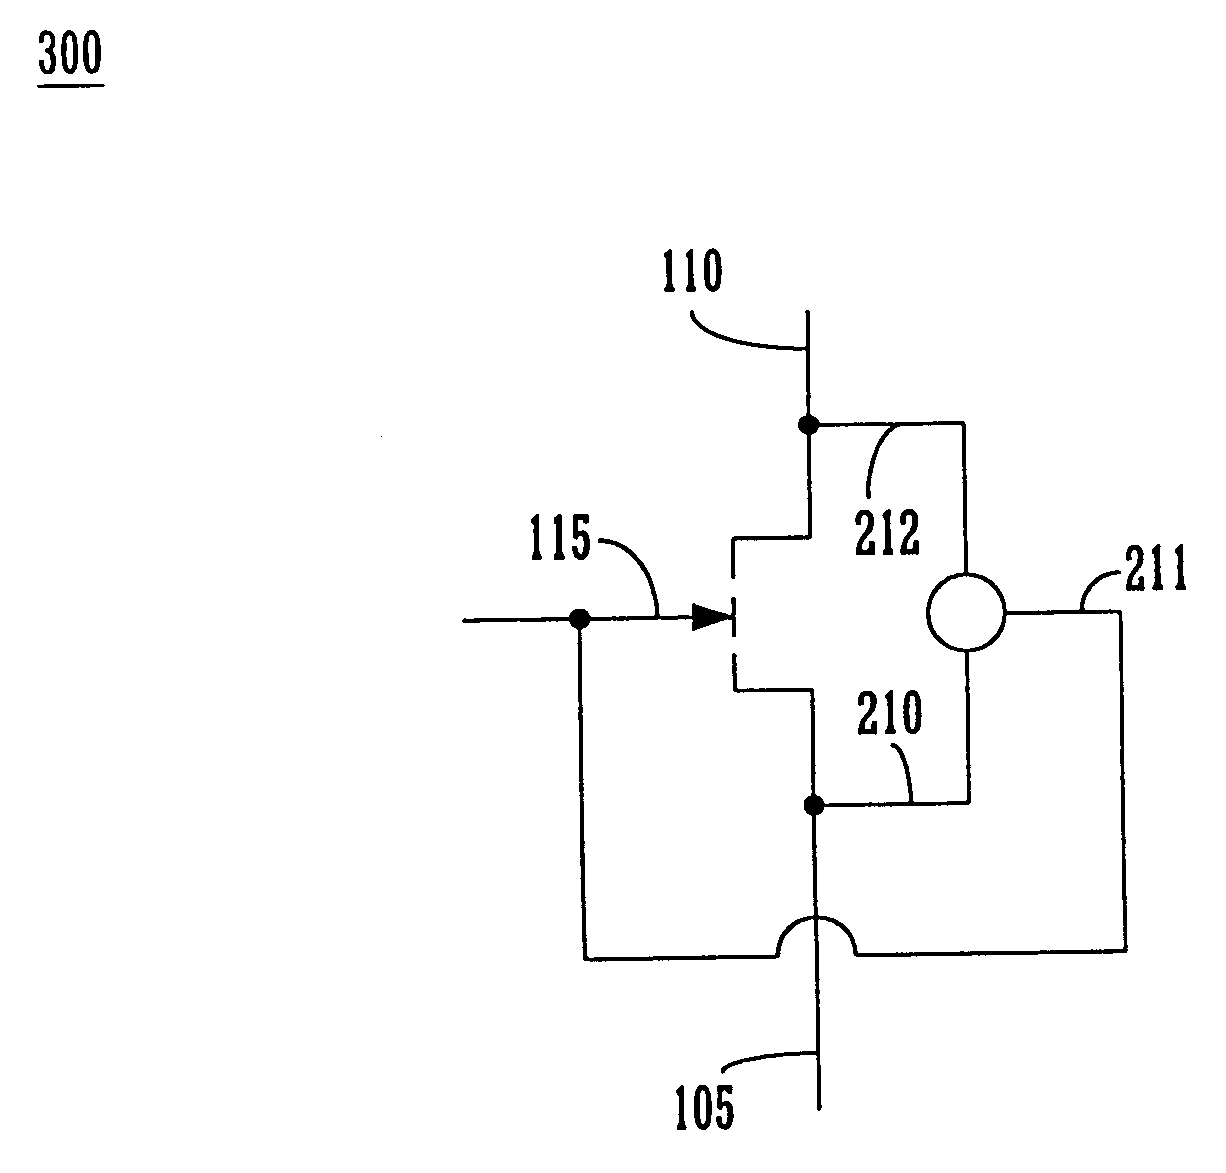 Starter device for normally off JFETs